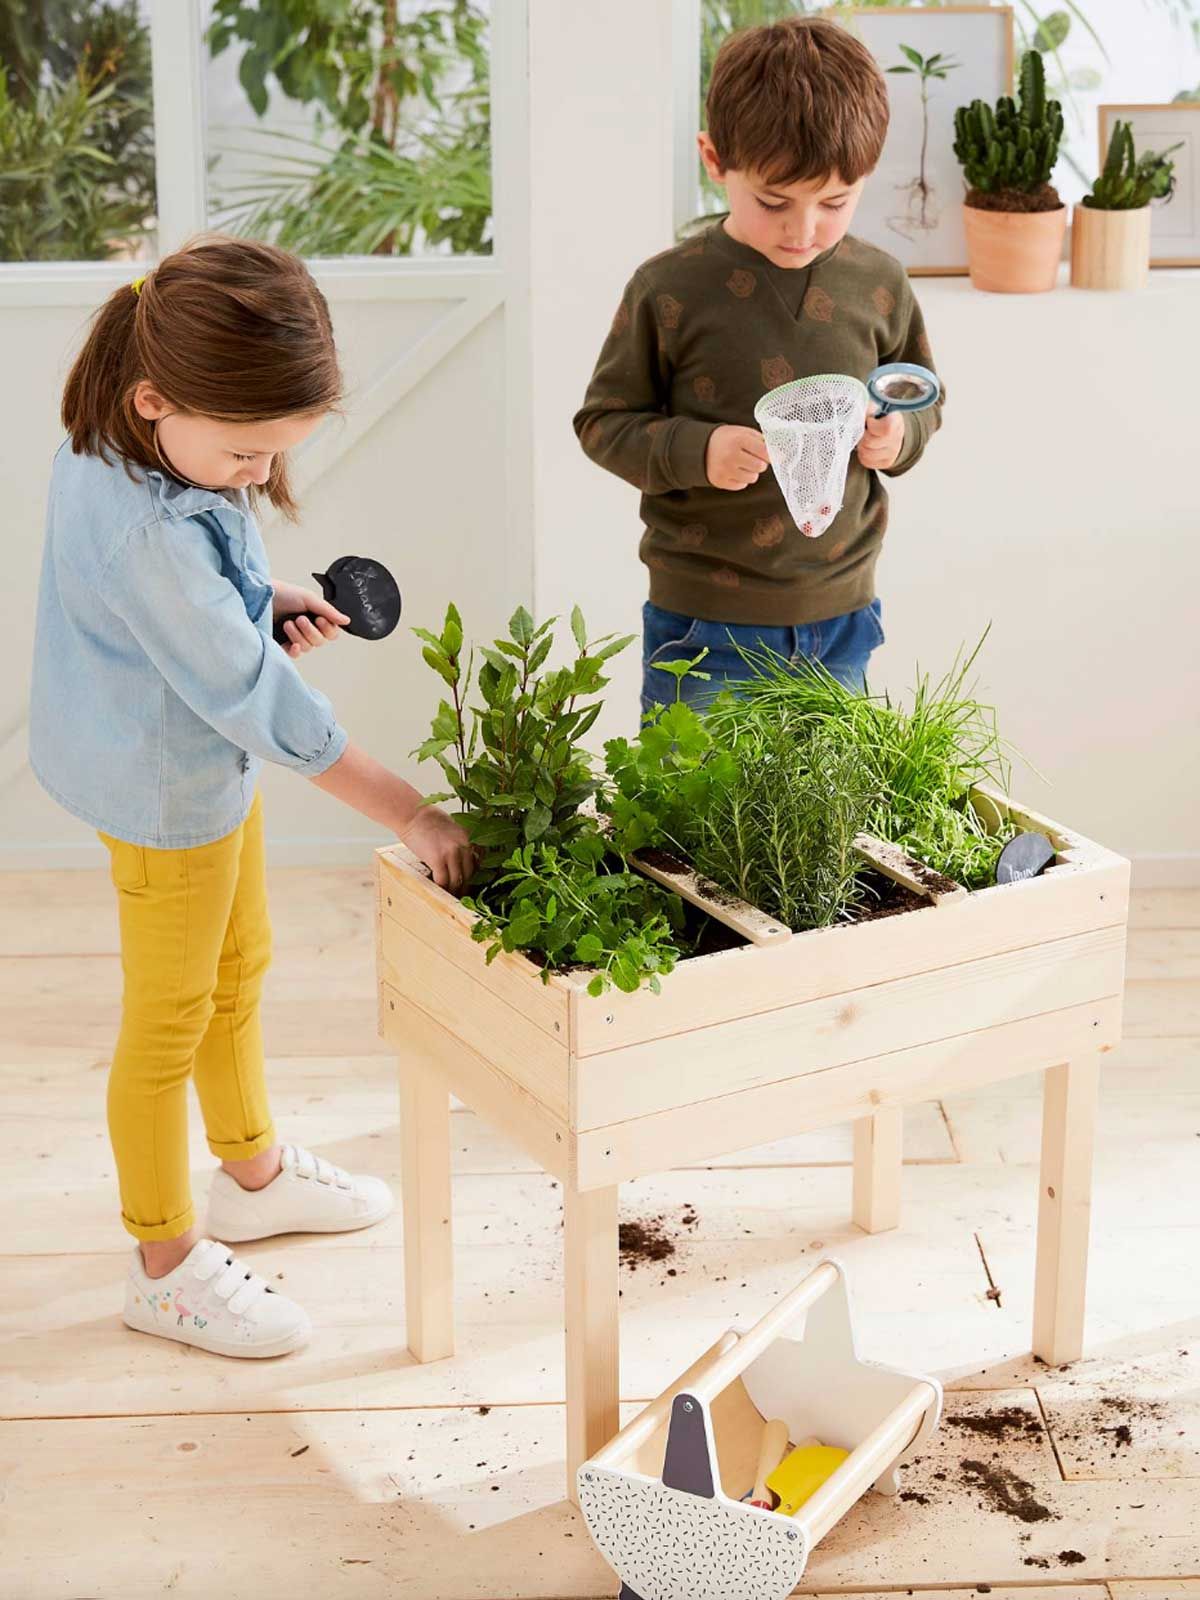 Wooden Square Vegetable Patch